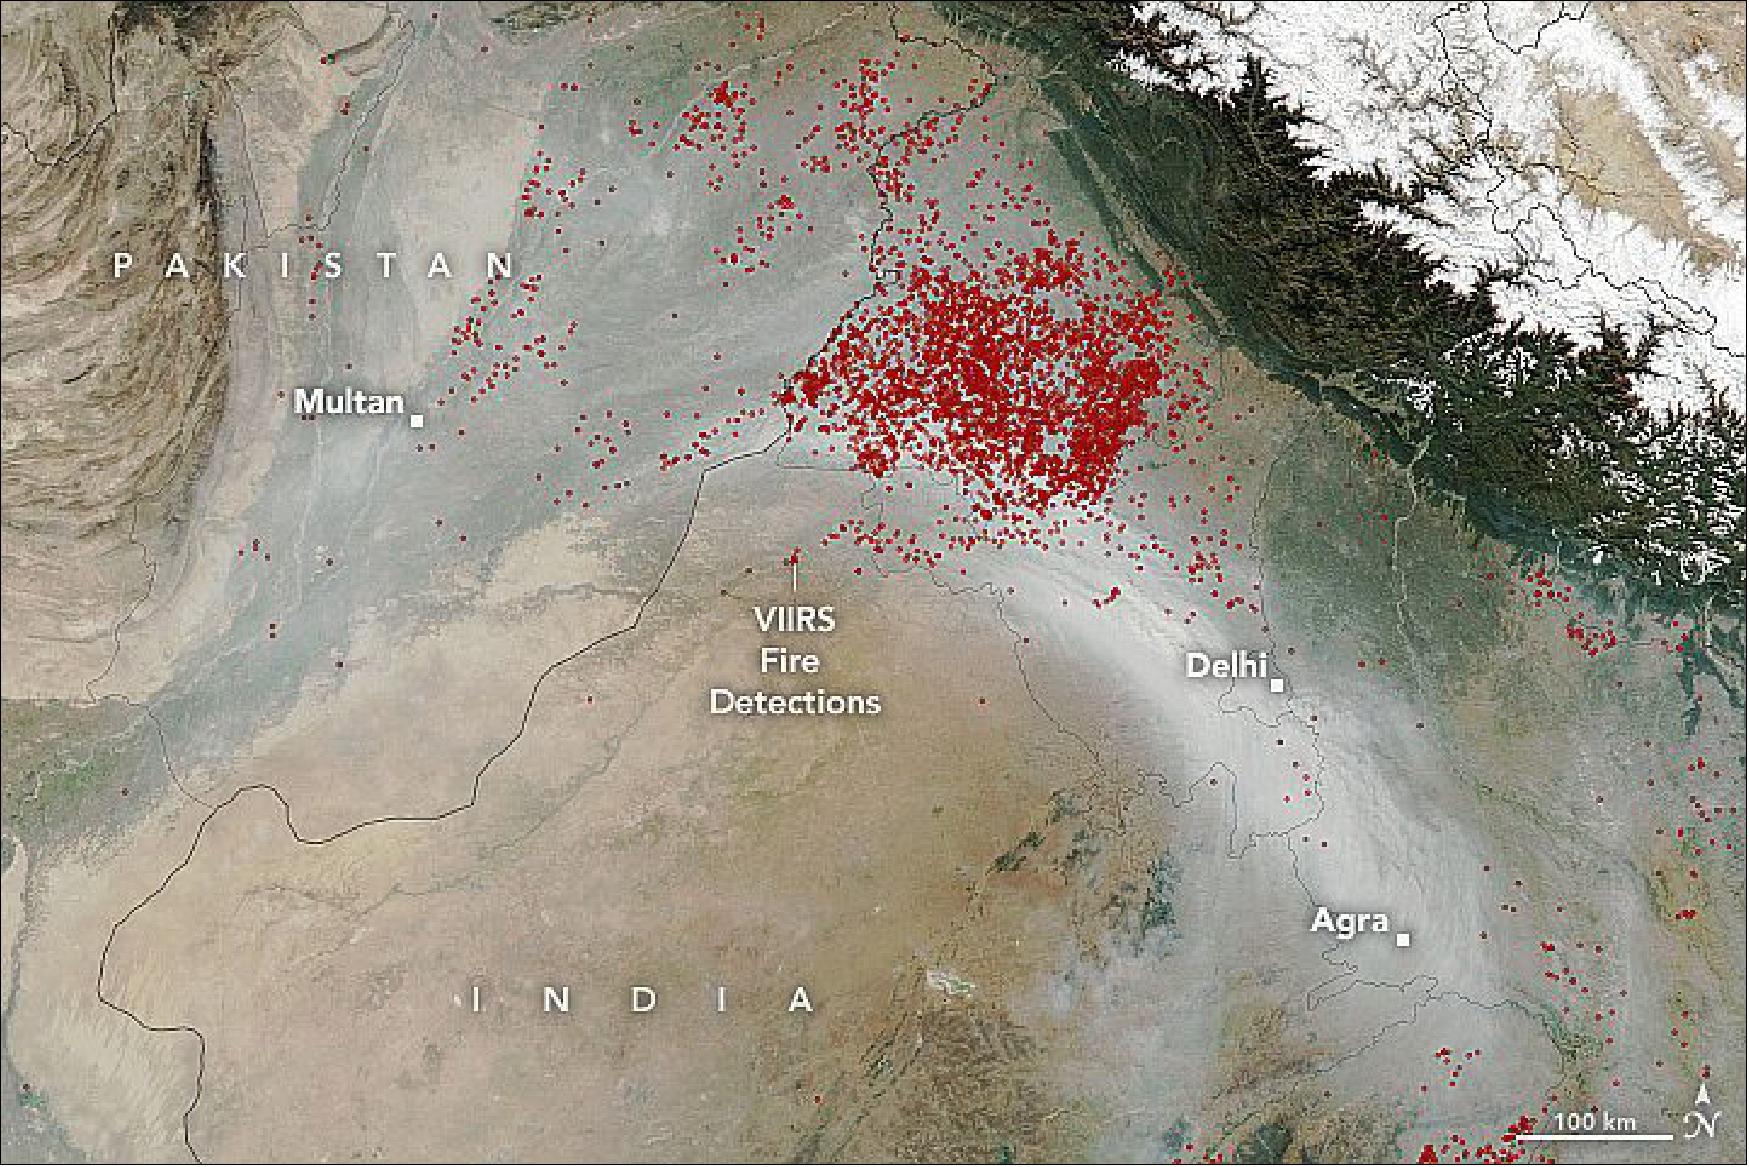 Figure 4: On November 11, 2021, the Visible Infrared Imaging Radiometer Suite (VIIRS) on the Suomi NPP satellite acquired this natural-color image of a river of smoke streaming from fires in Punjab and Haryana toward Delhi, one of India’s most populous cities. Use the image comparison slider to see the locations of hotspots observed by VIIRS that afternoon. Fires in northern Pakistan likely contributed some of the smoke as well (image credit: NASA Earth Observatory)